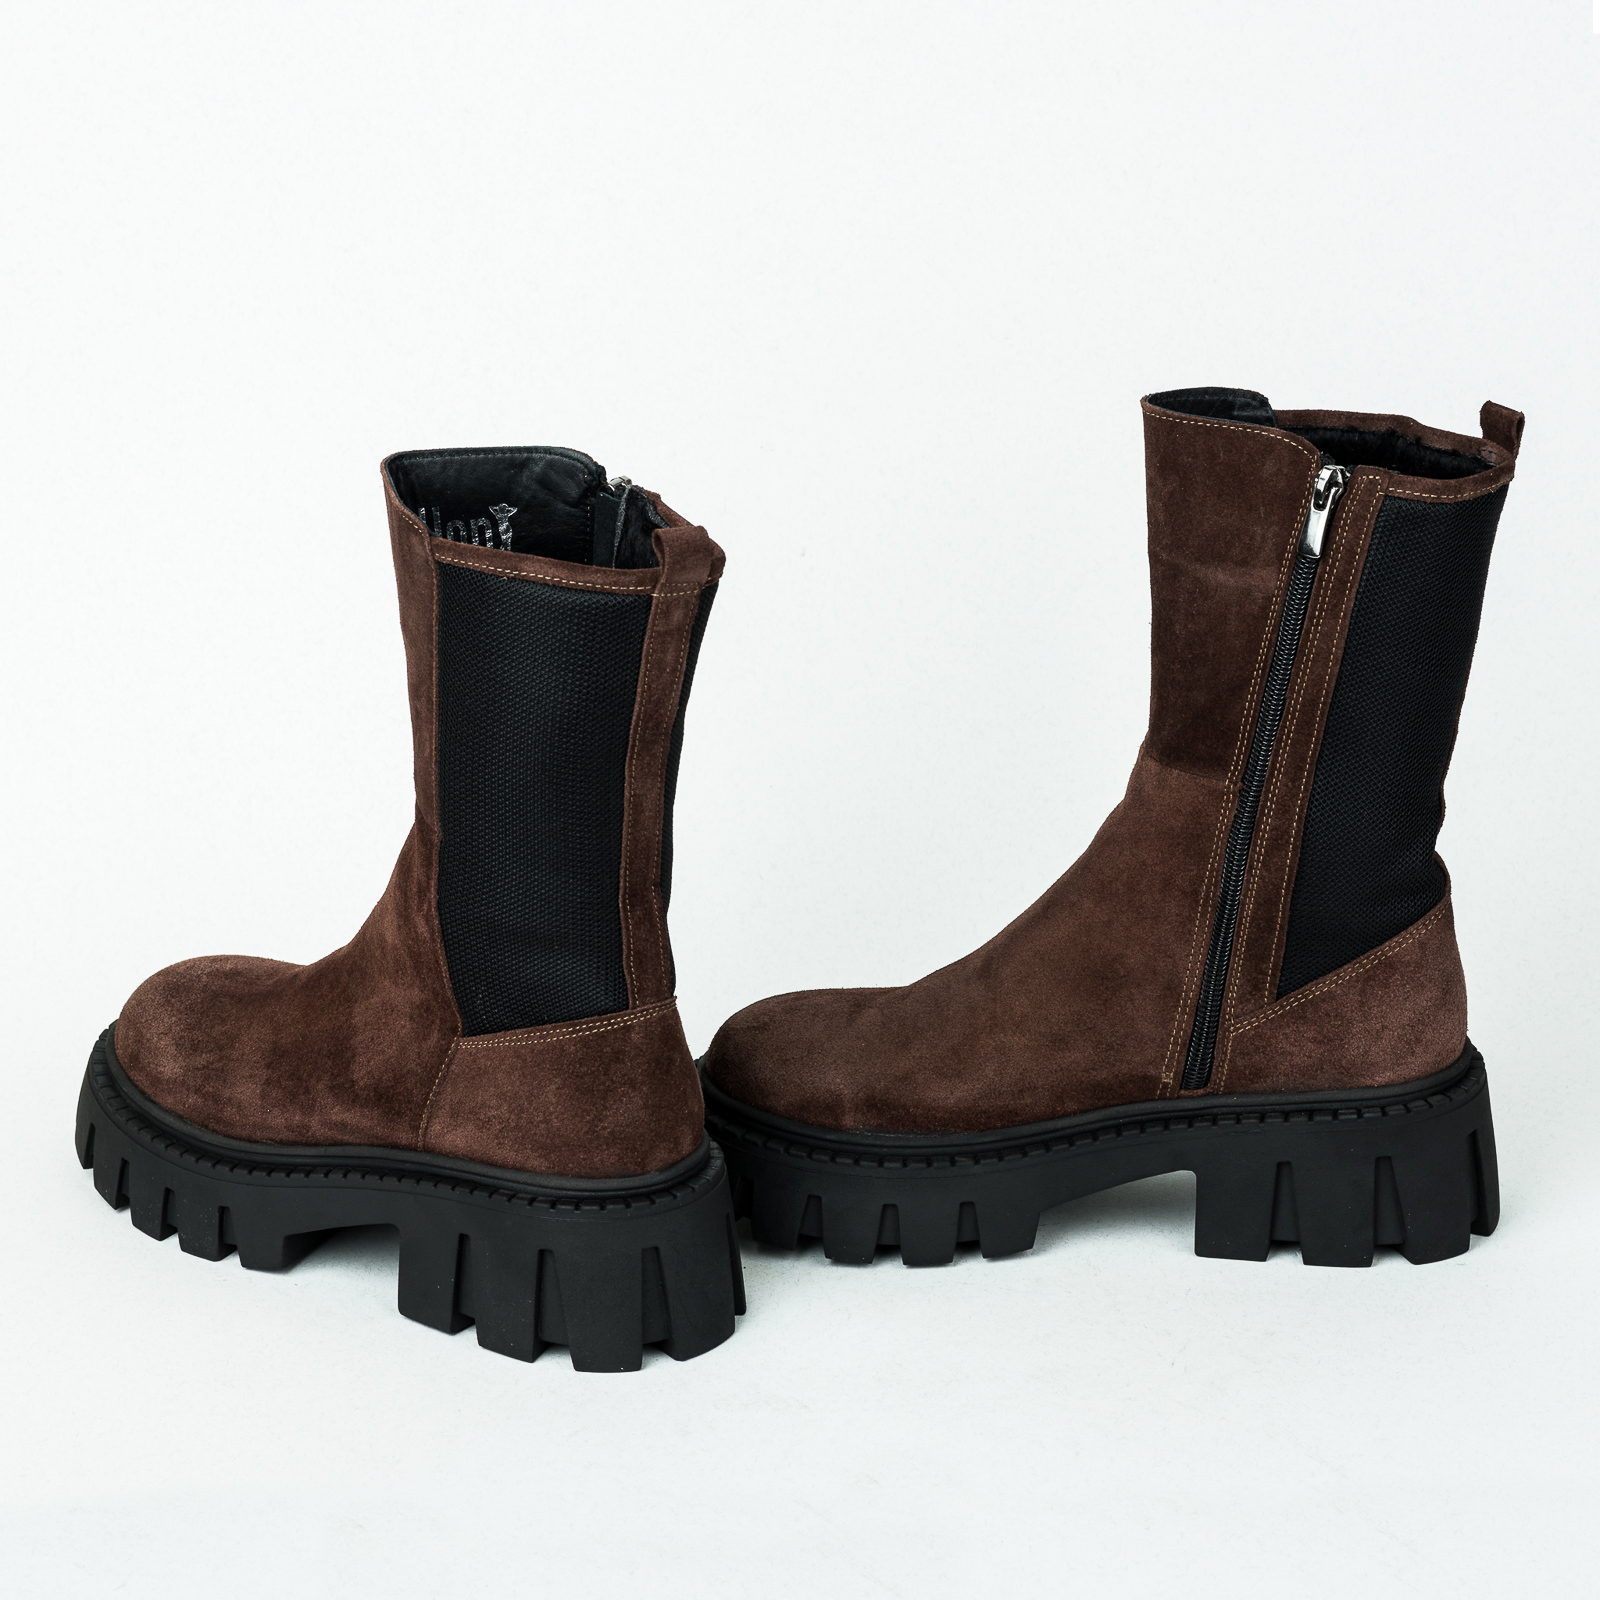 Leather booties B247 - BROWN